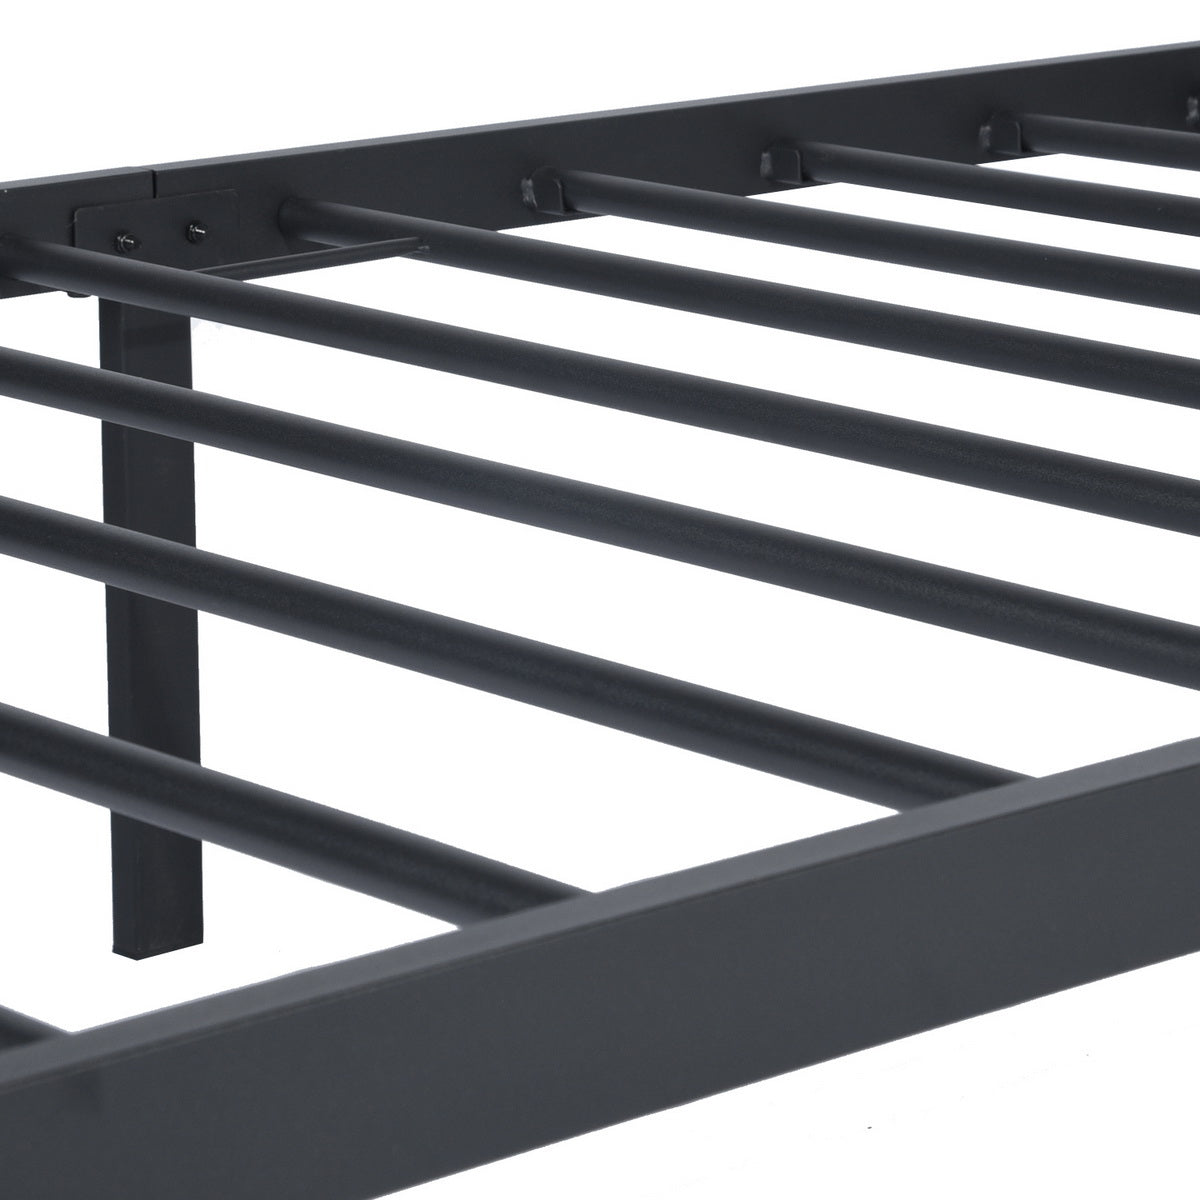 twin size single metal bed frame